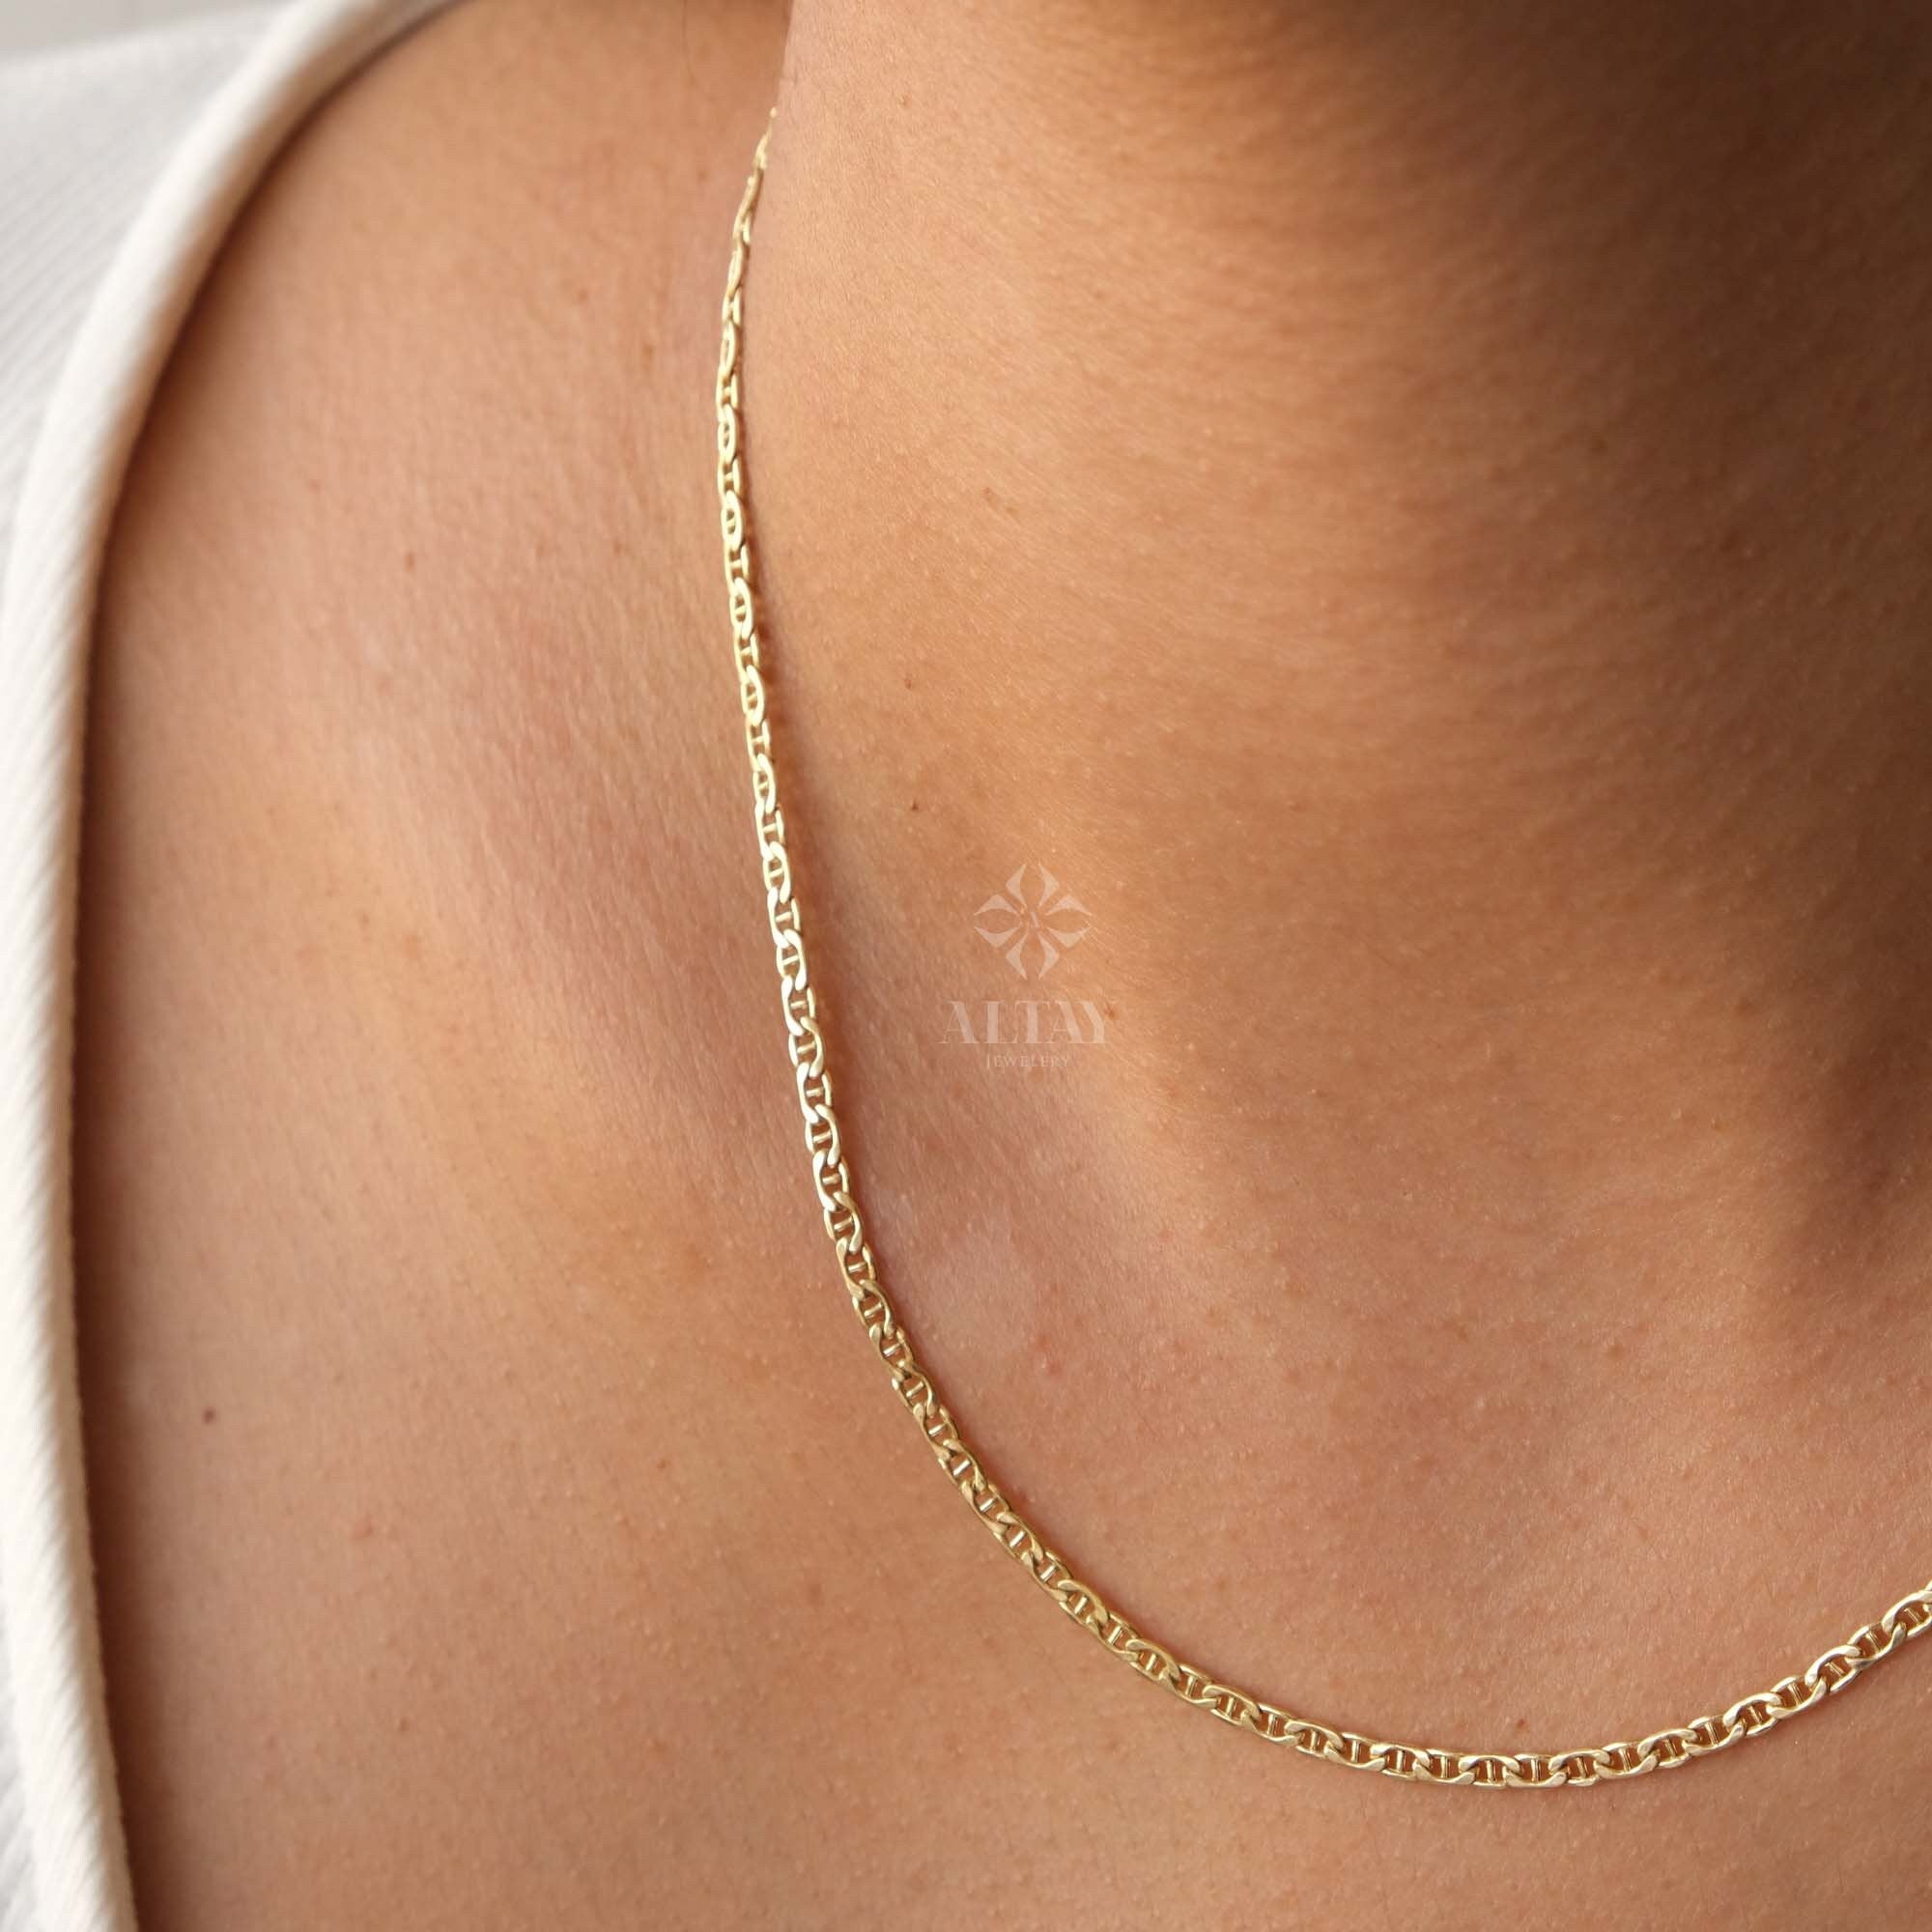 14K Gold Mariner Chain Necklace, 2mm Mariner Link Chain Necklace, Anchor Link Necklace, Flat Mariner Necklace, Minimalist Layering Necklace